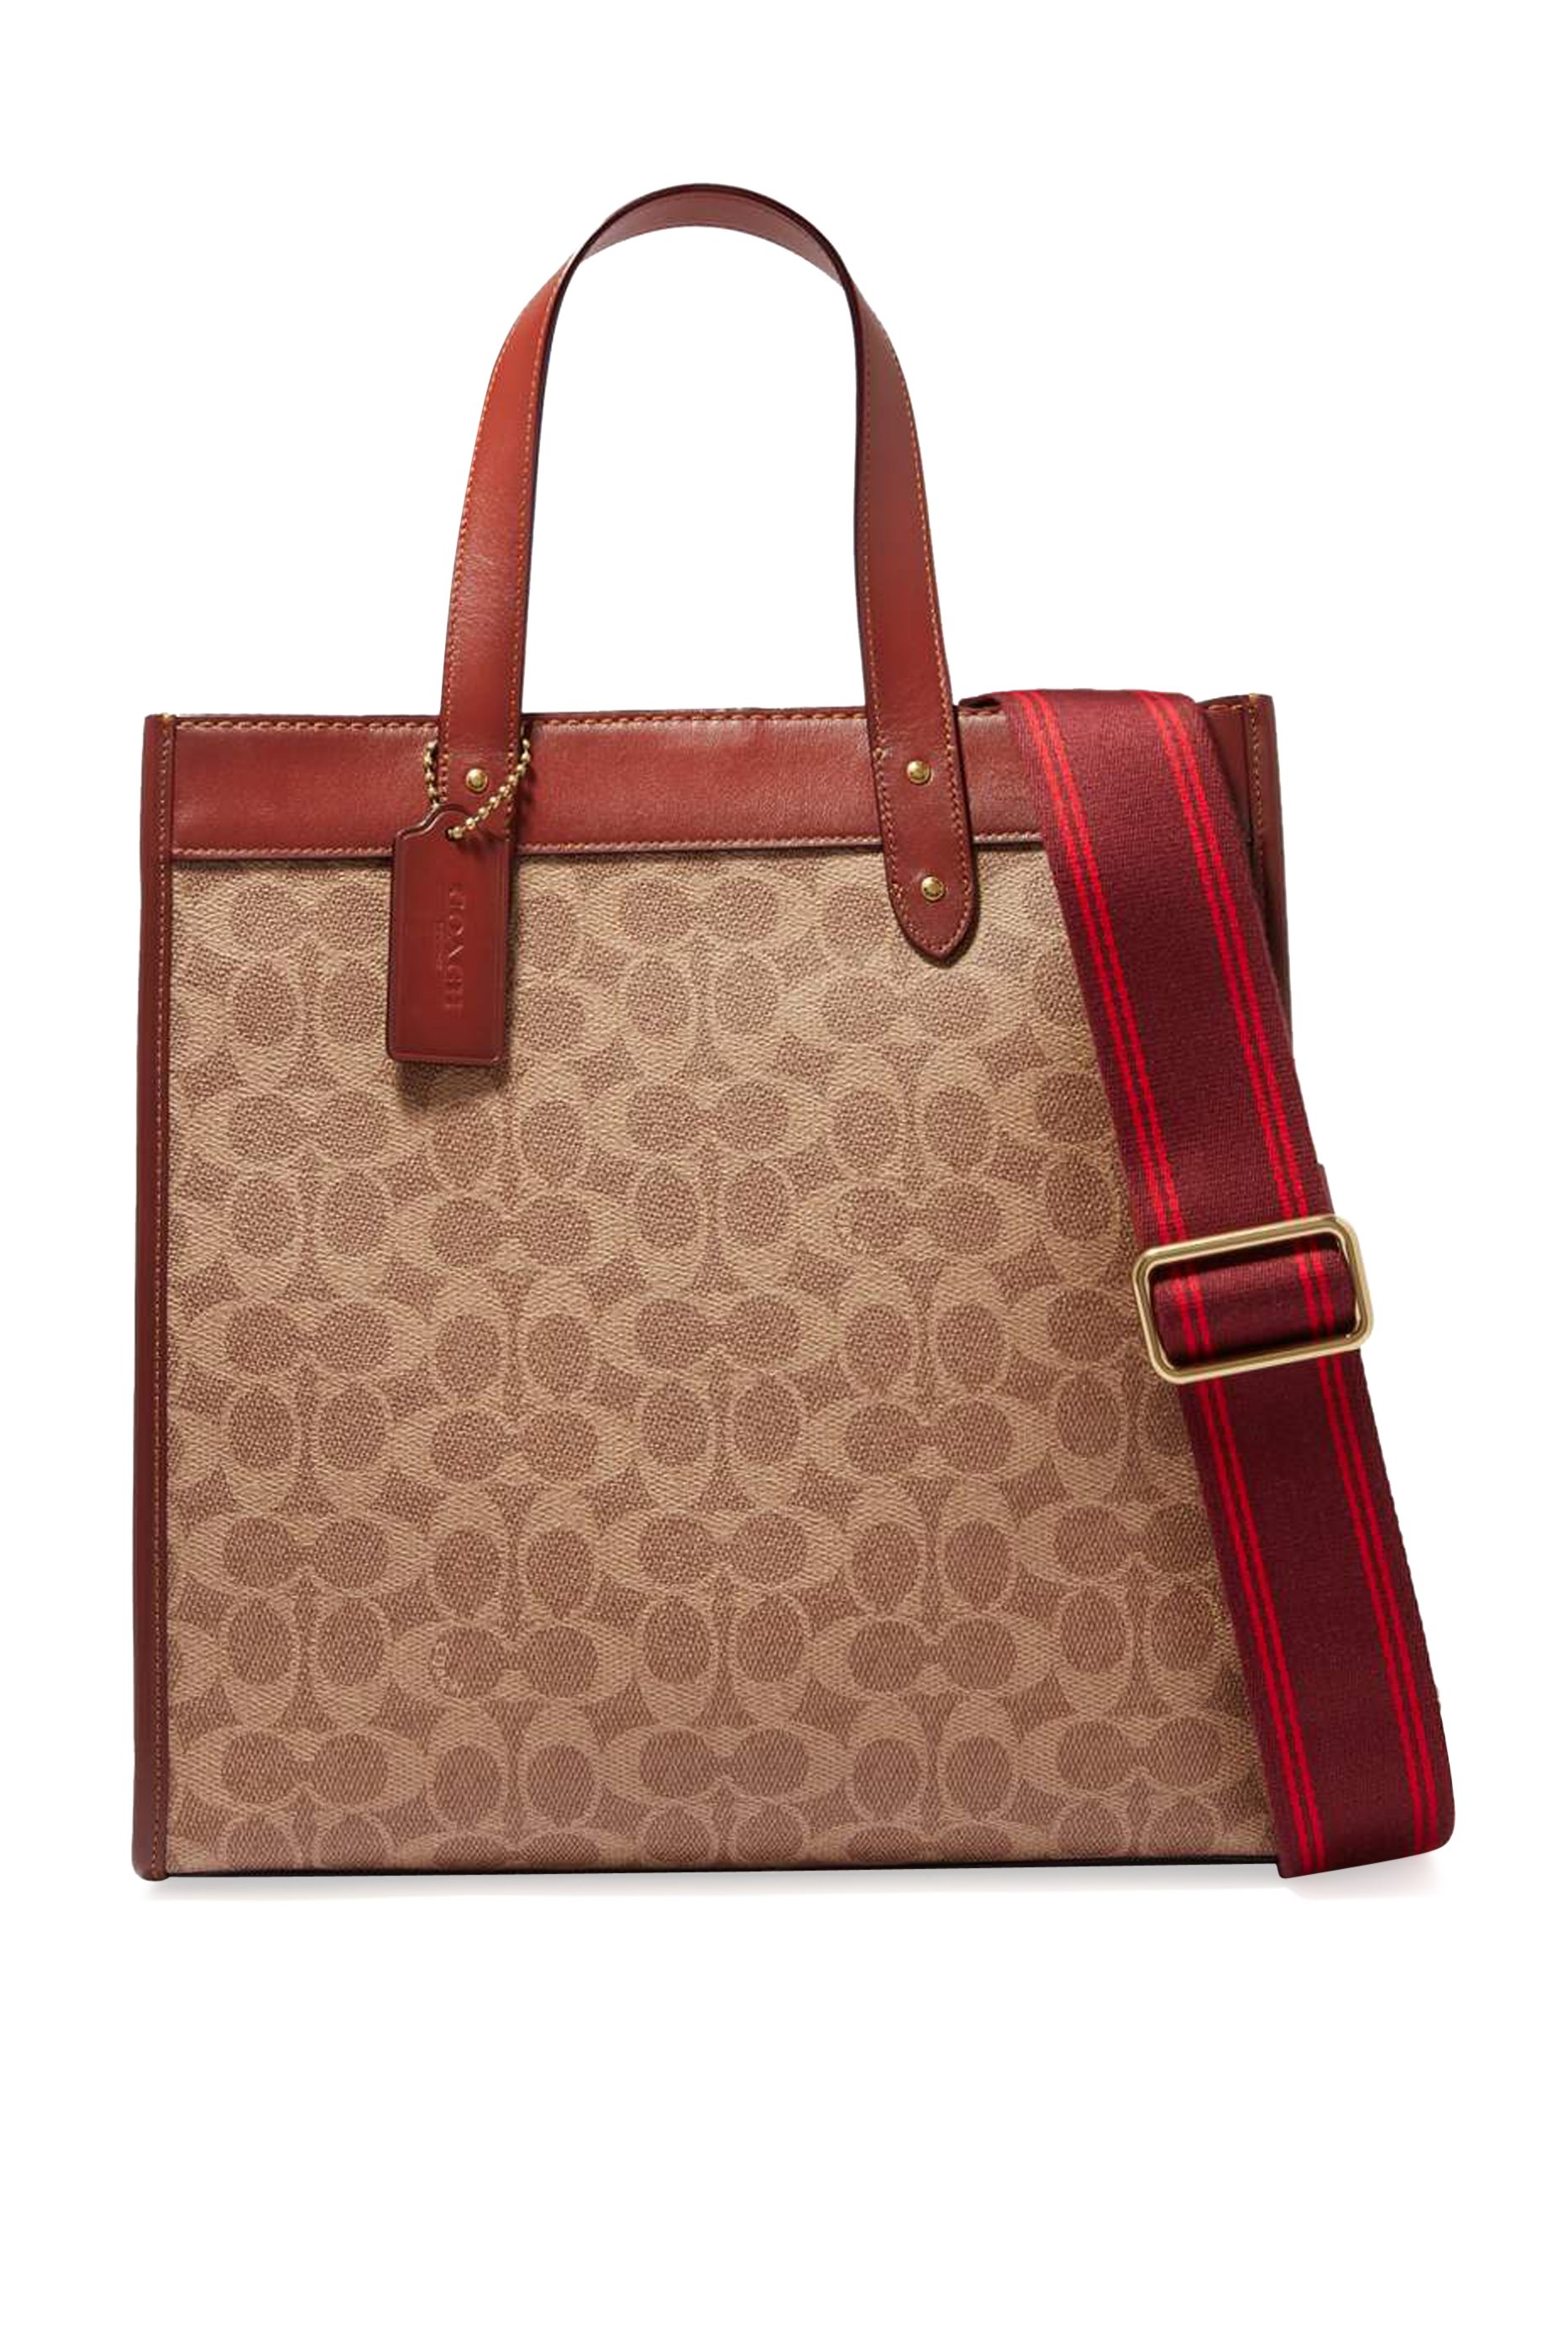 Buy Coach Signature Canvas Field Tote Bag for Womens | Bloomingdale's UAE